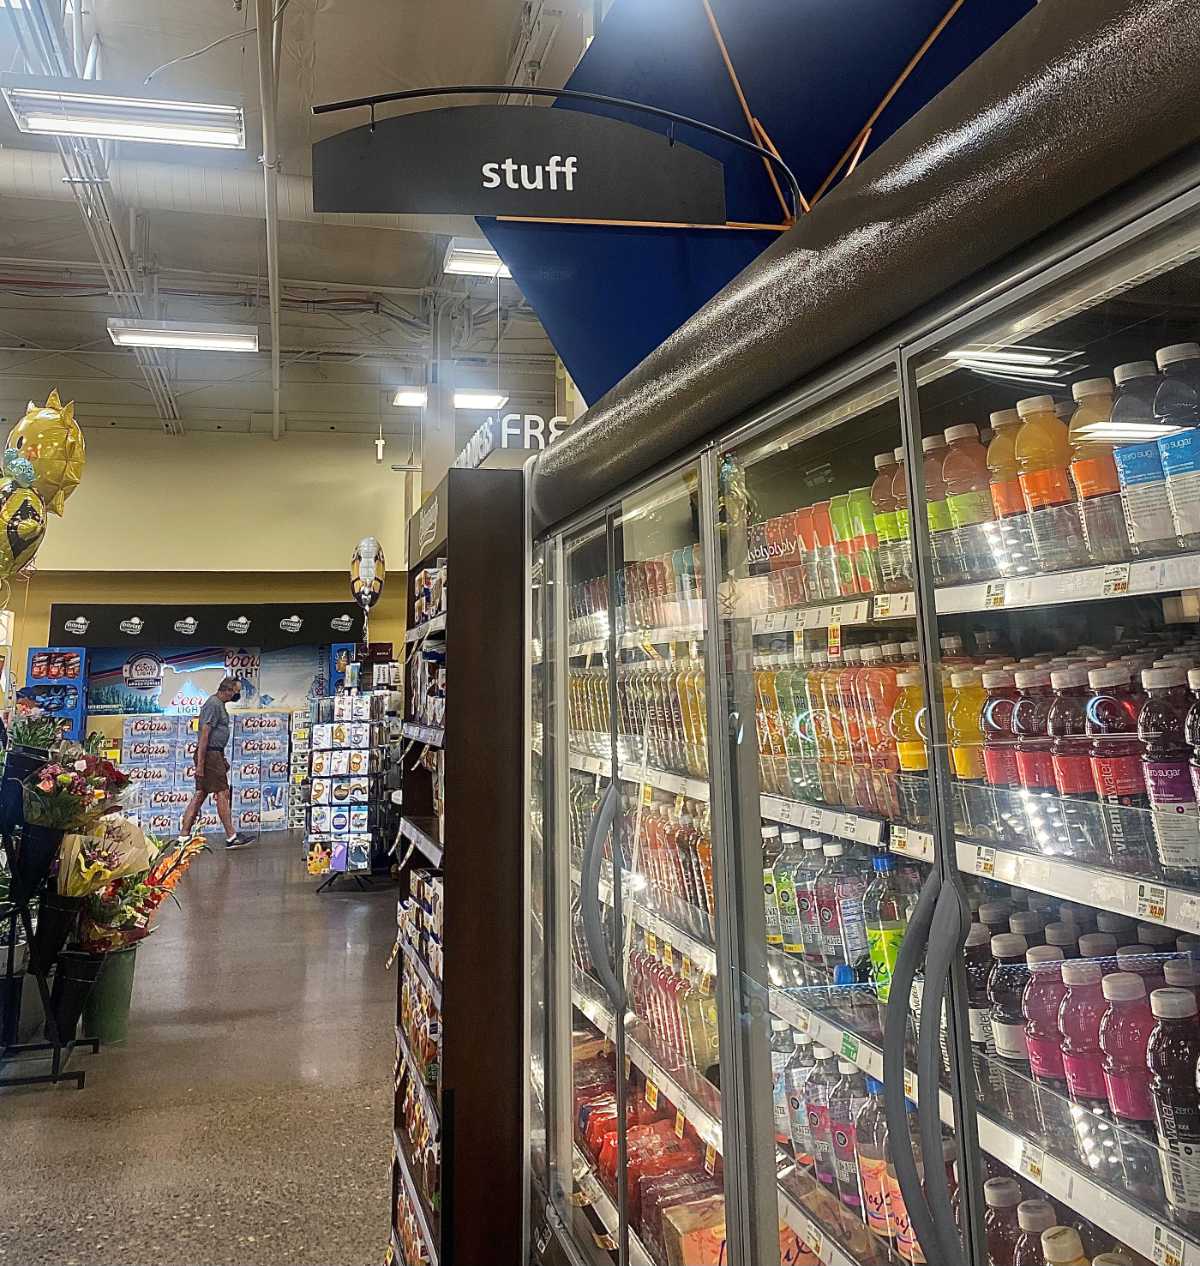 My local grocery store sells stuff